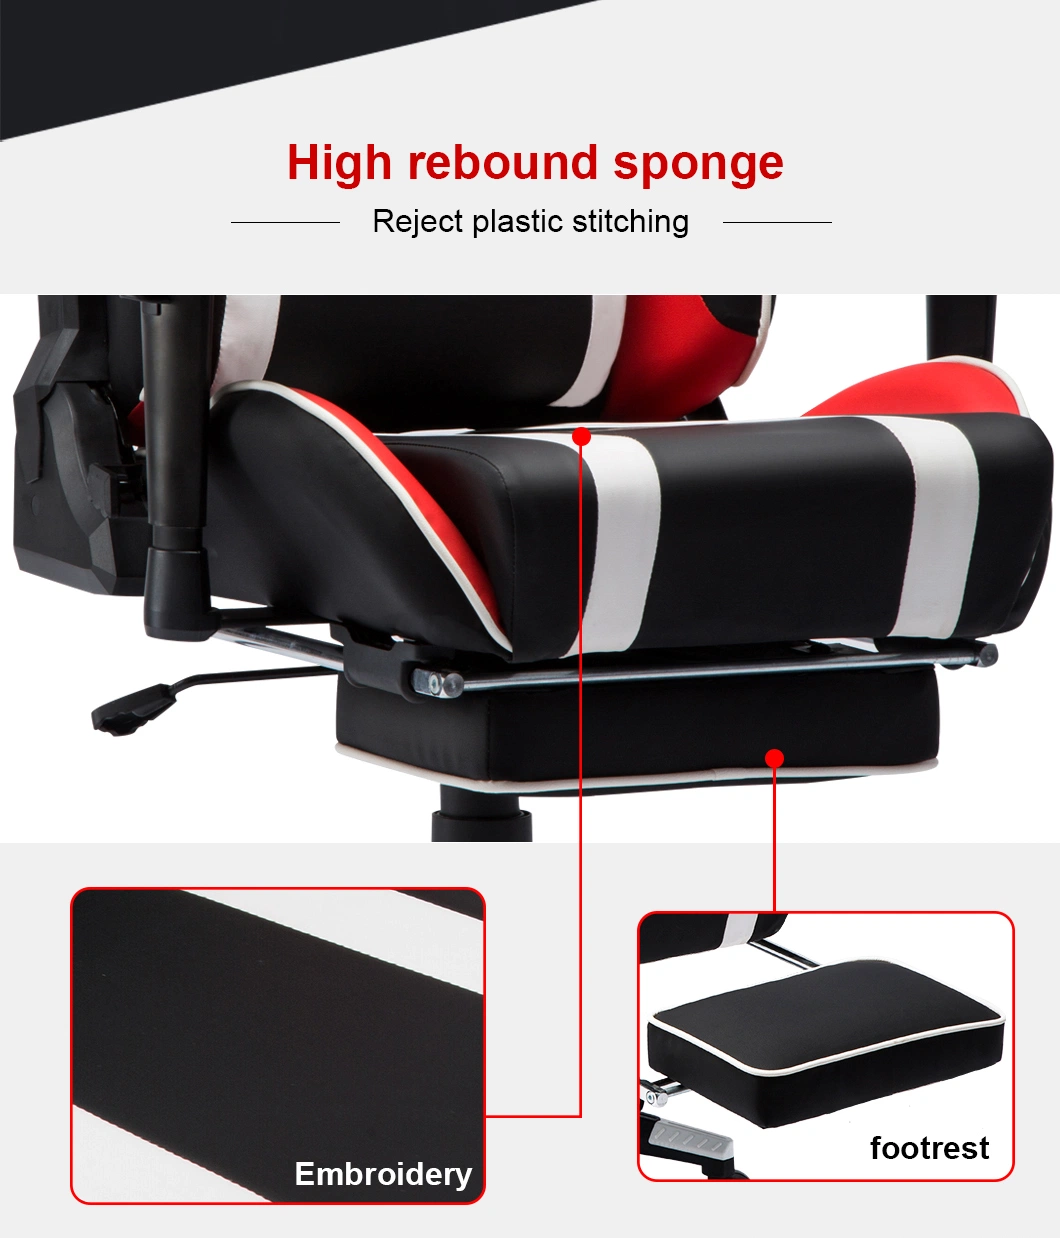 Wholesale Ergonomic Racing Office Gaming Chair New Gaming Chair